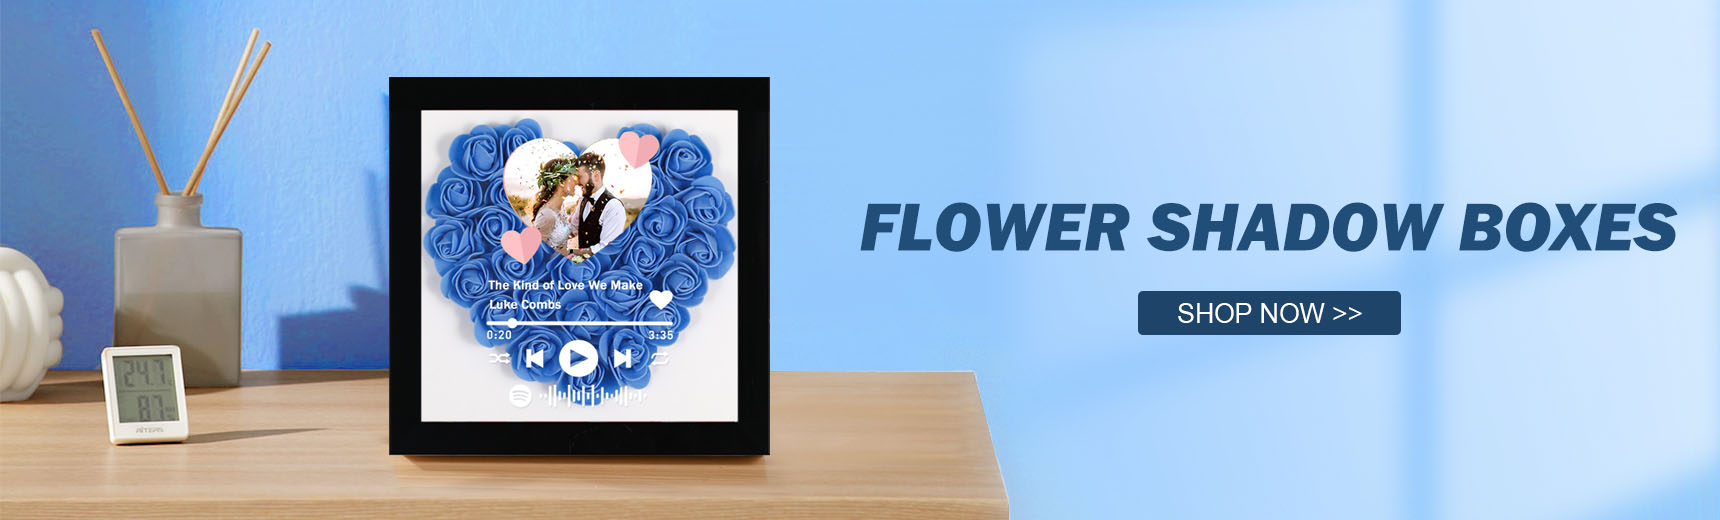 FLOWER SHADOW BOXES